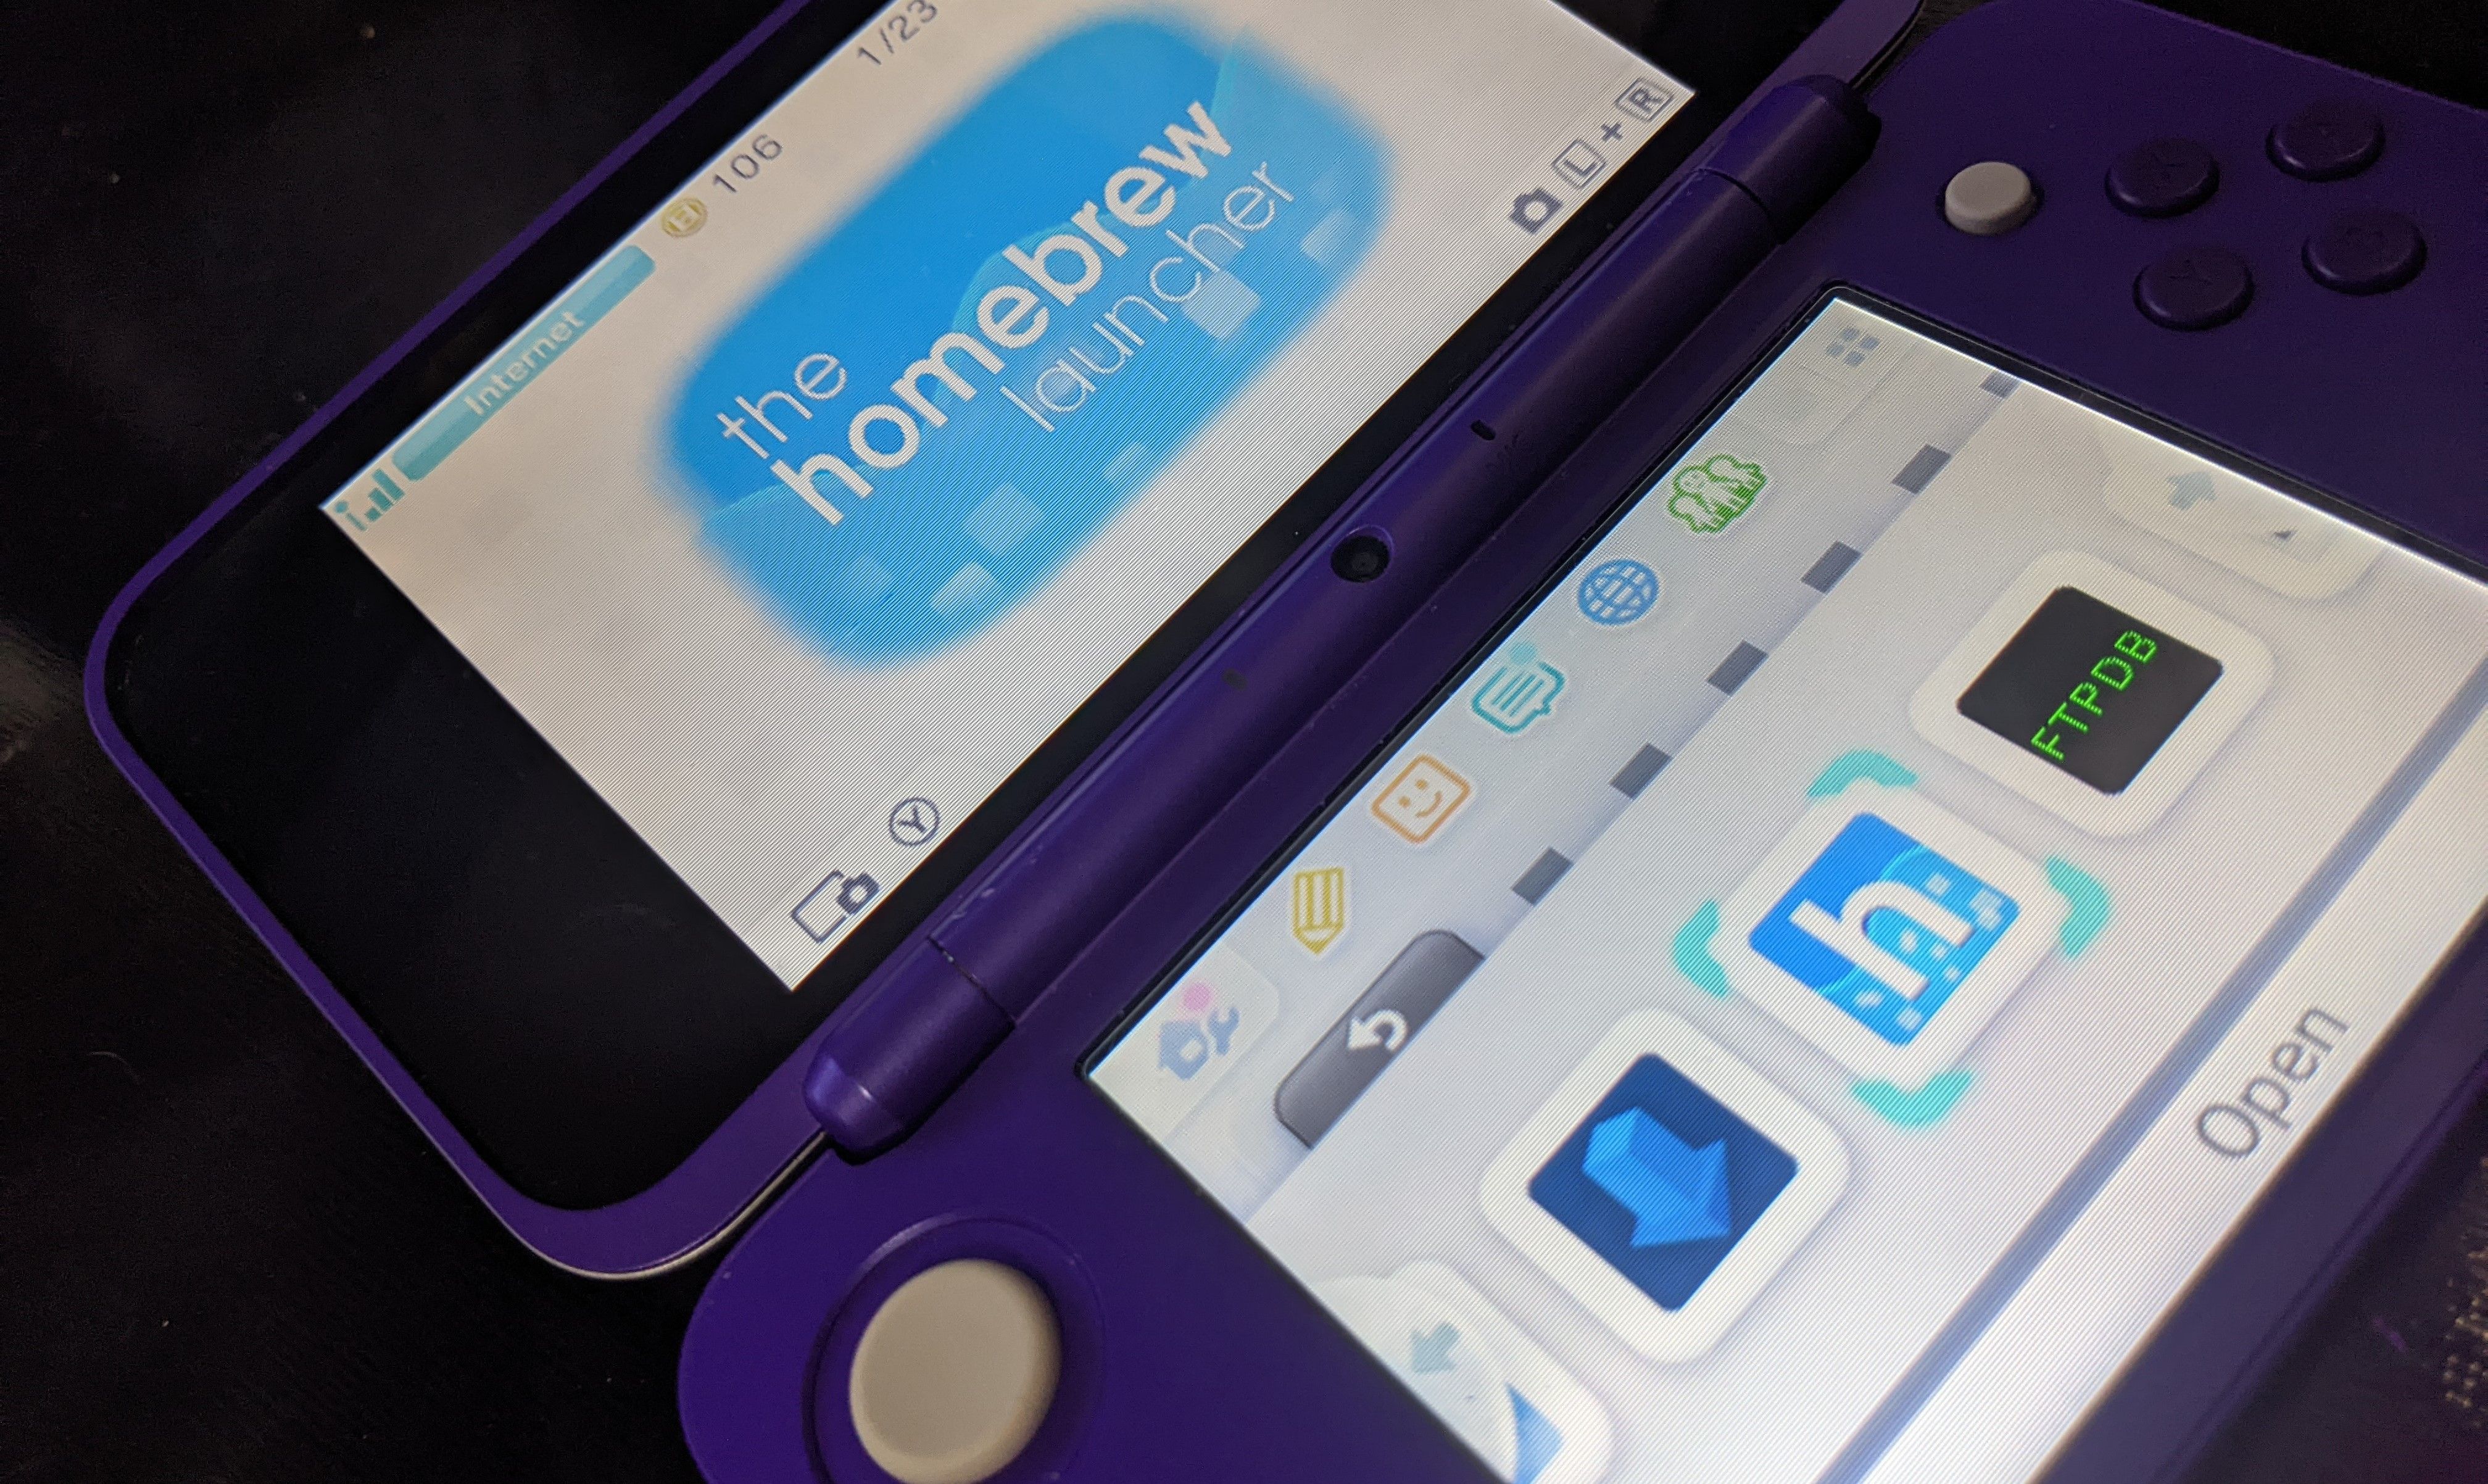 The Homebrew Launcher running on a modded New 2DS XL Model.